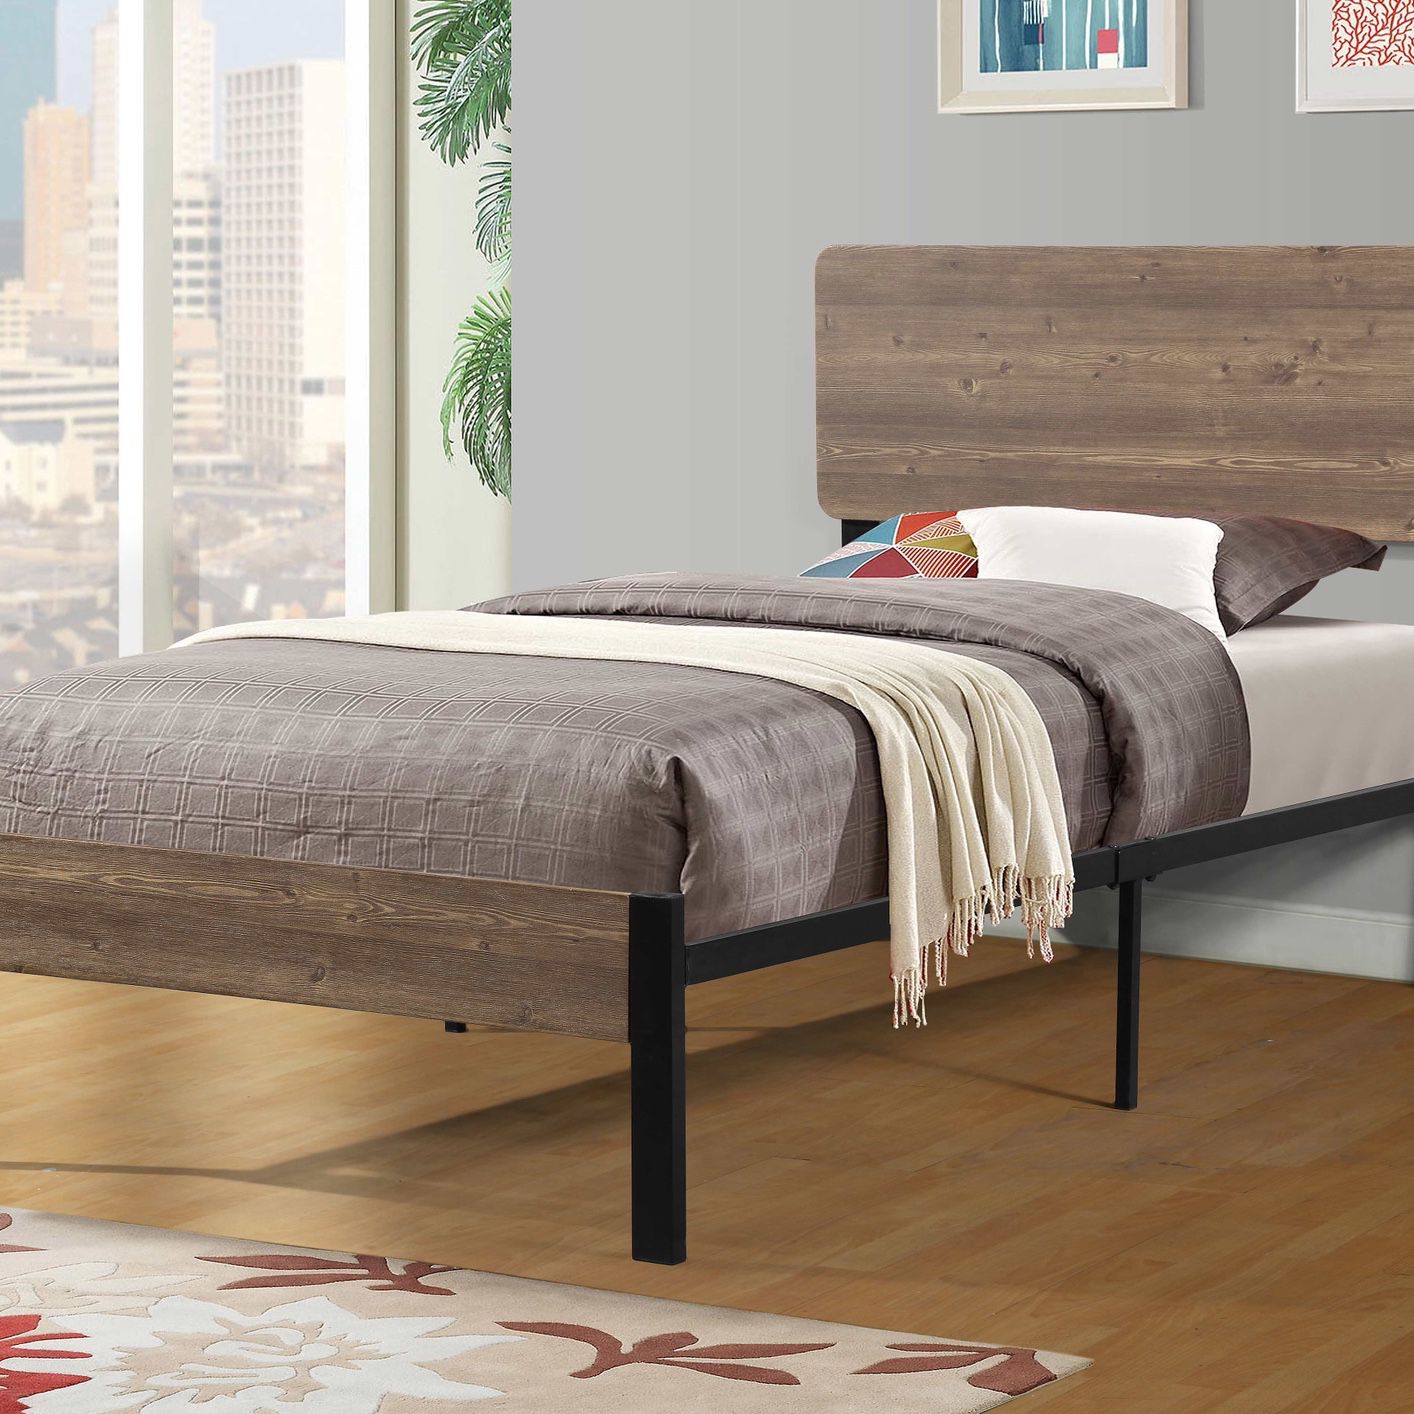 Twin Platform Bed Frame In Two Tone Brown/Metal Finish